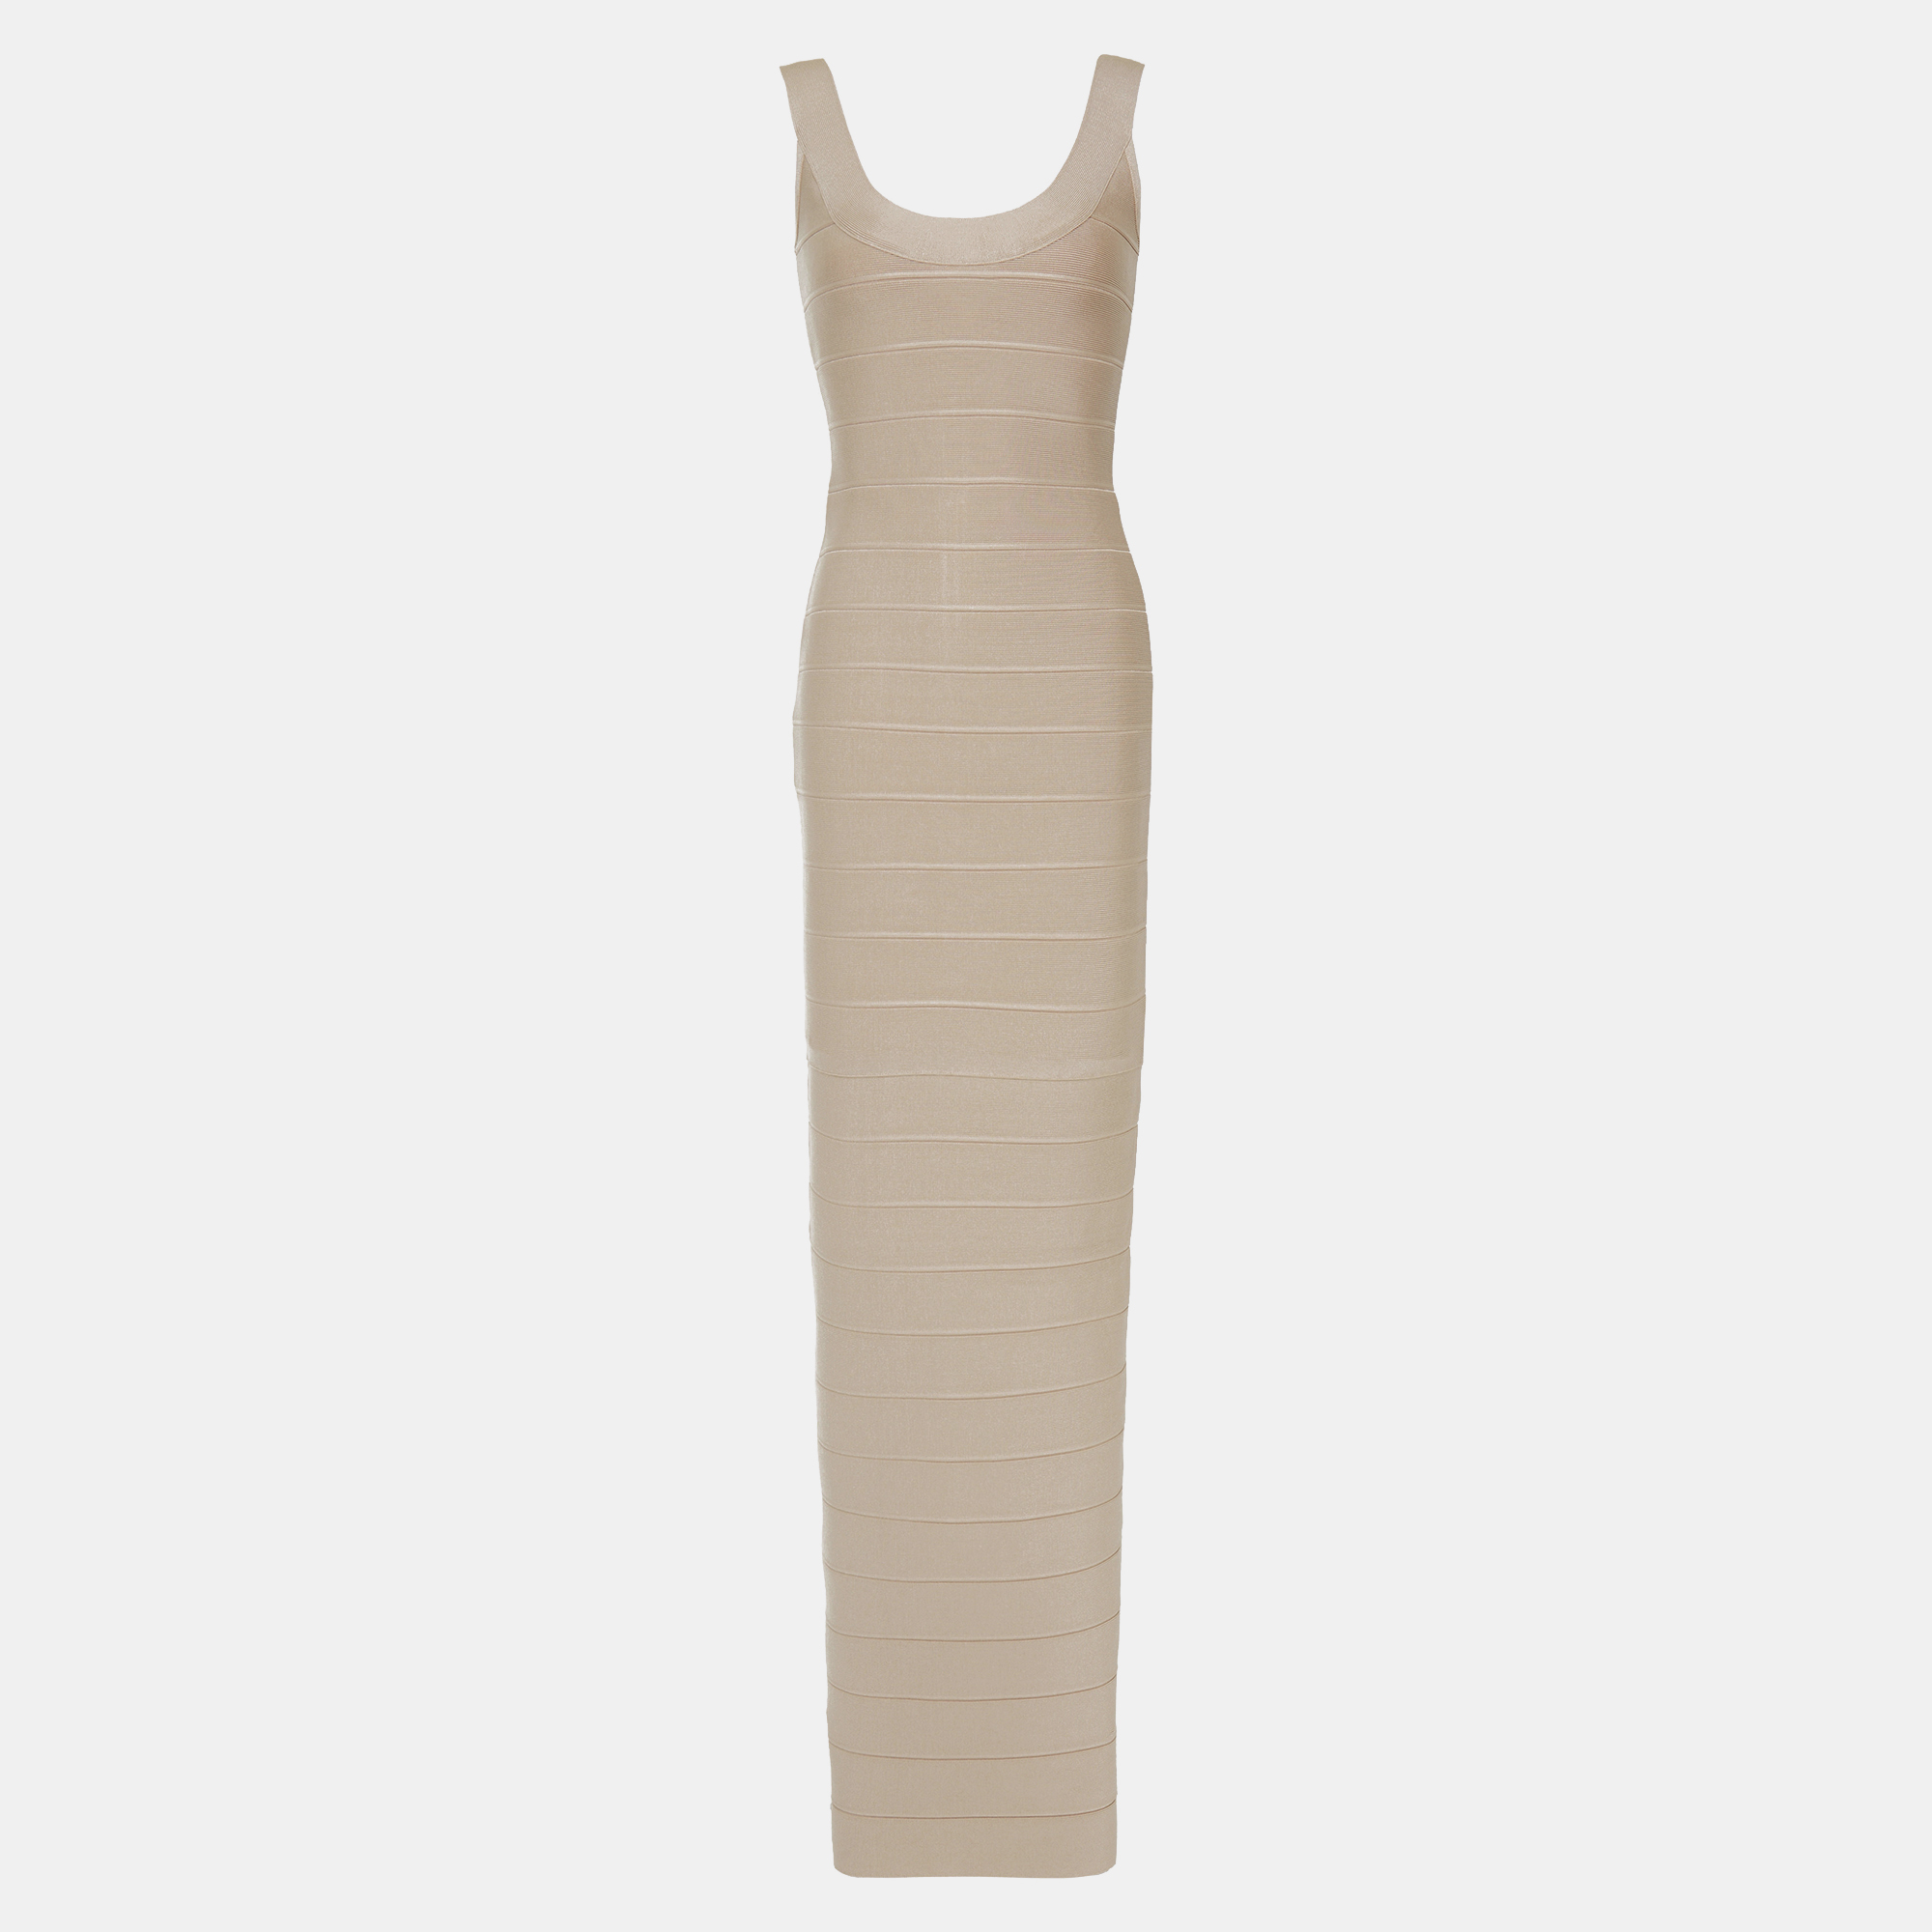 Herve leger rayon gowns s